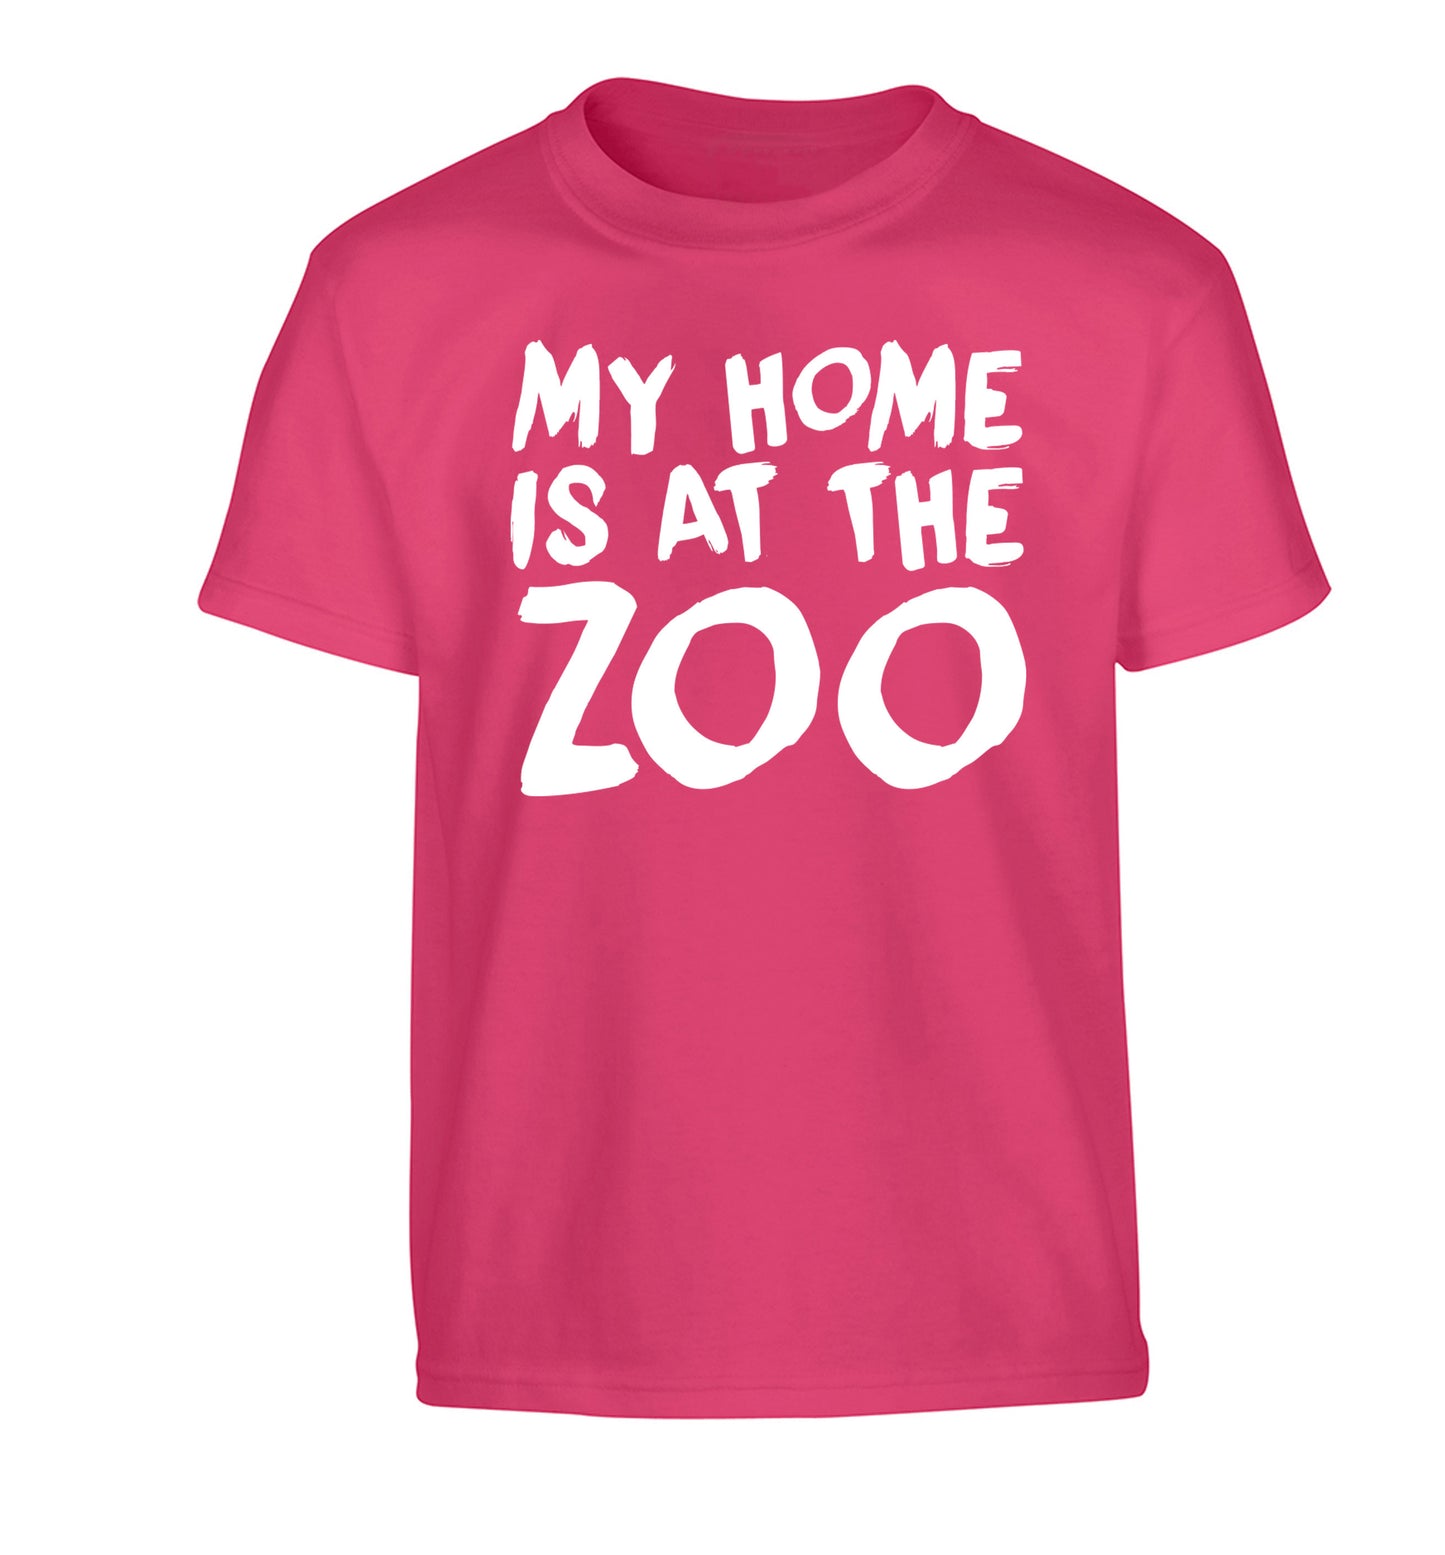 My home is at the zoo Children's pink Tshirt 12-14 Years